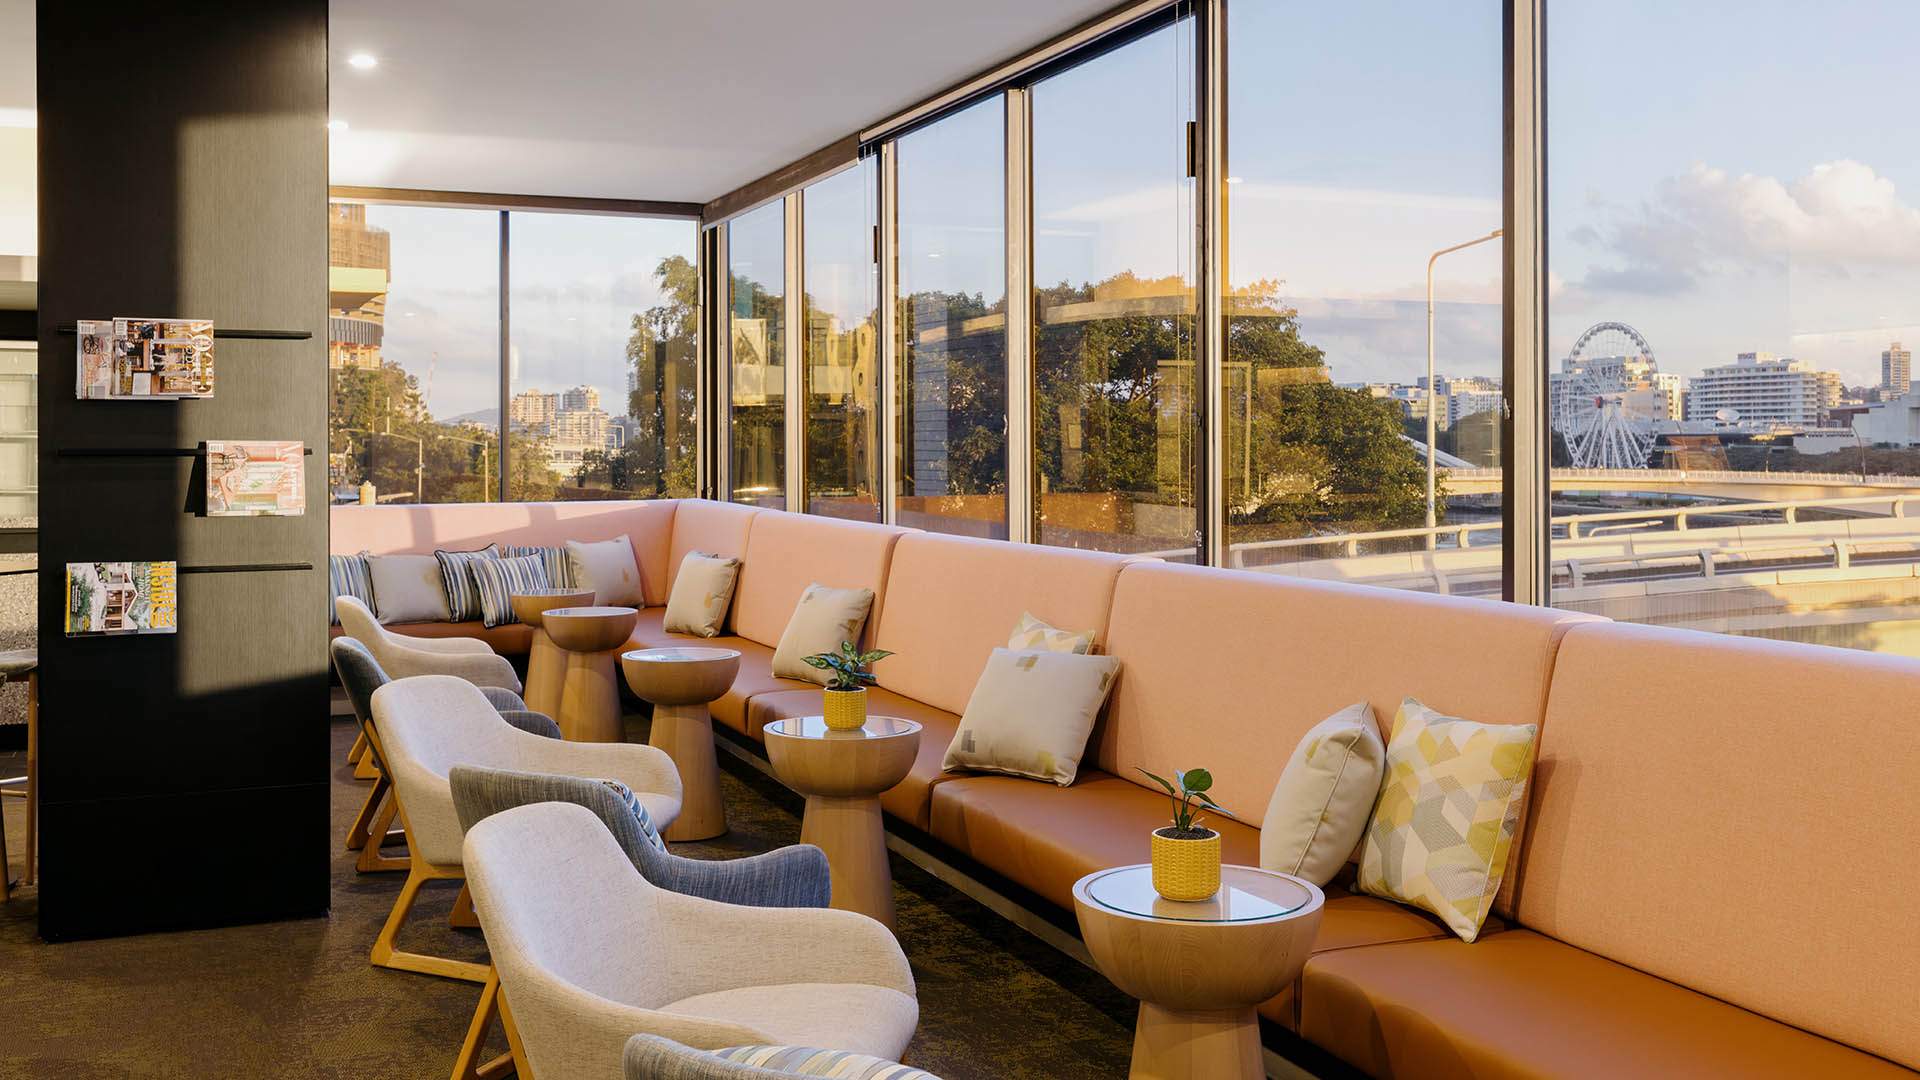 Voco Has Just Opened Brisbane CBD's Newest Riverside Hotel with a Lounge Bar and Rooftop Pool